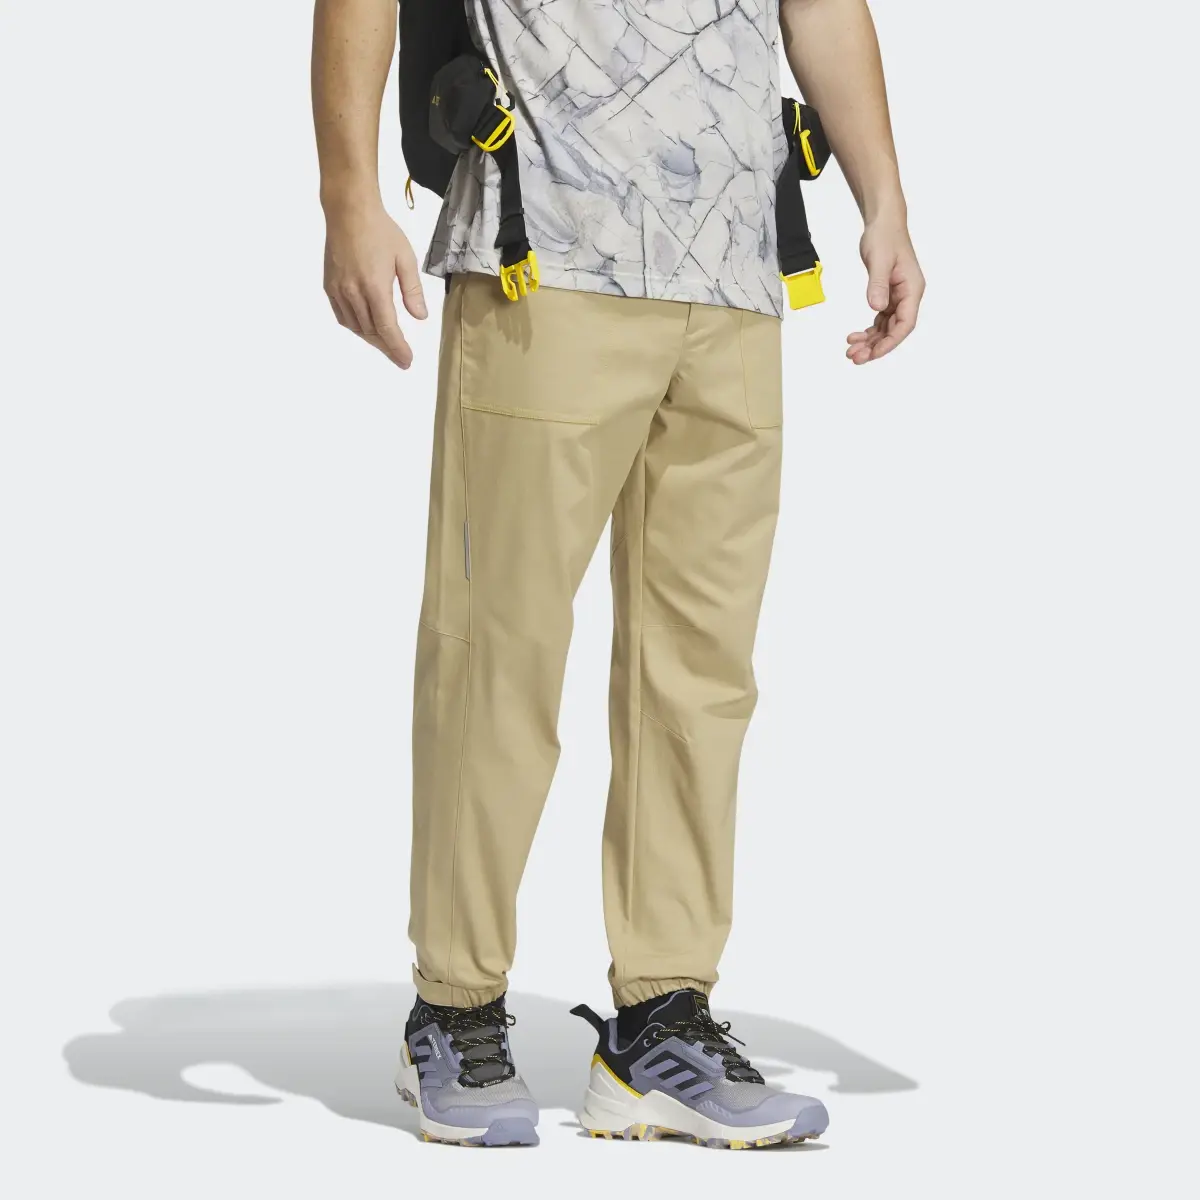 Adidas National Geographic Twill Pants. 3